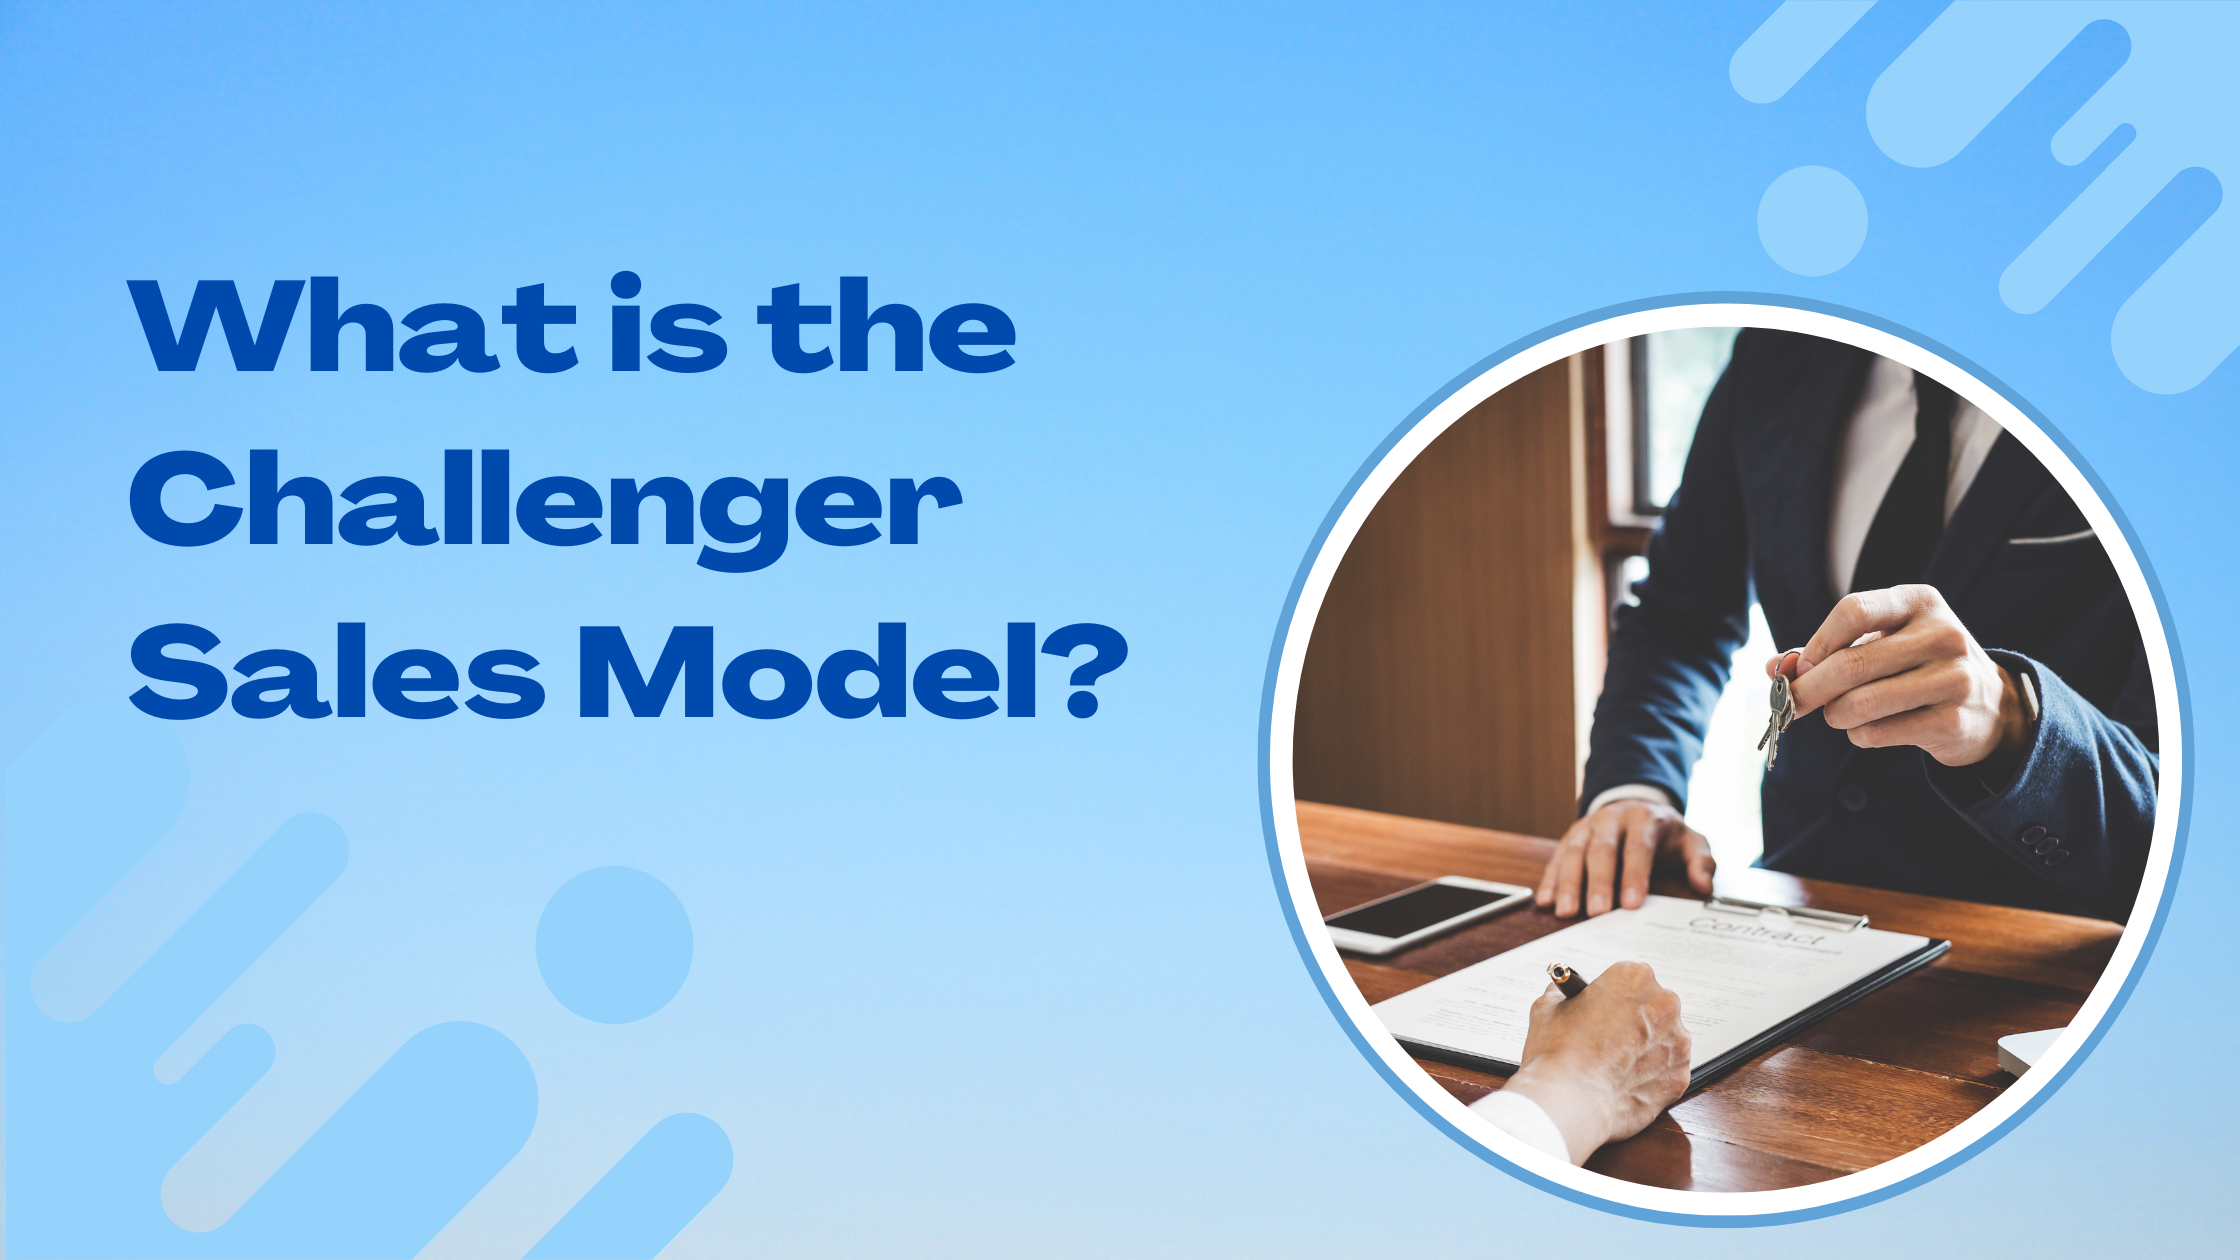 What is the Challenger Sales Model?